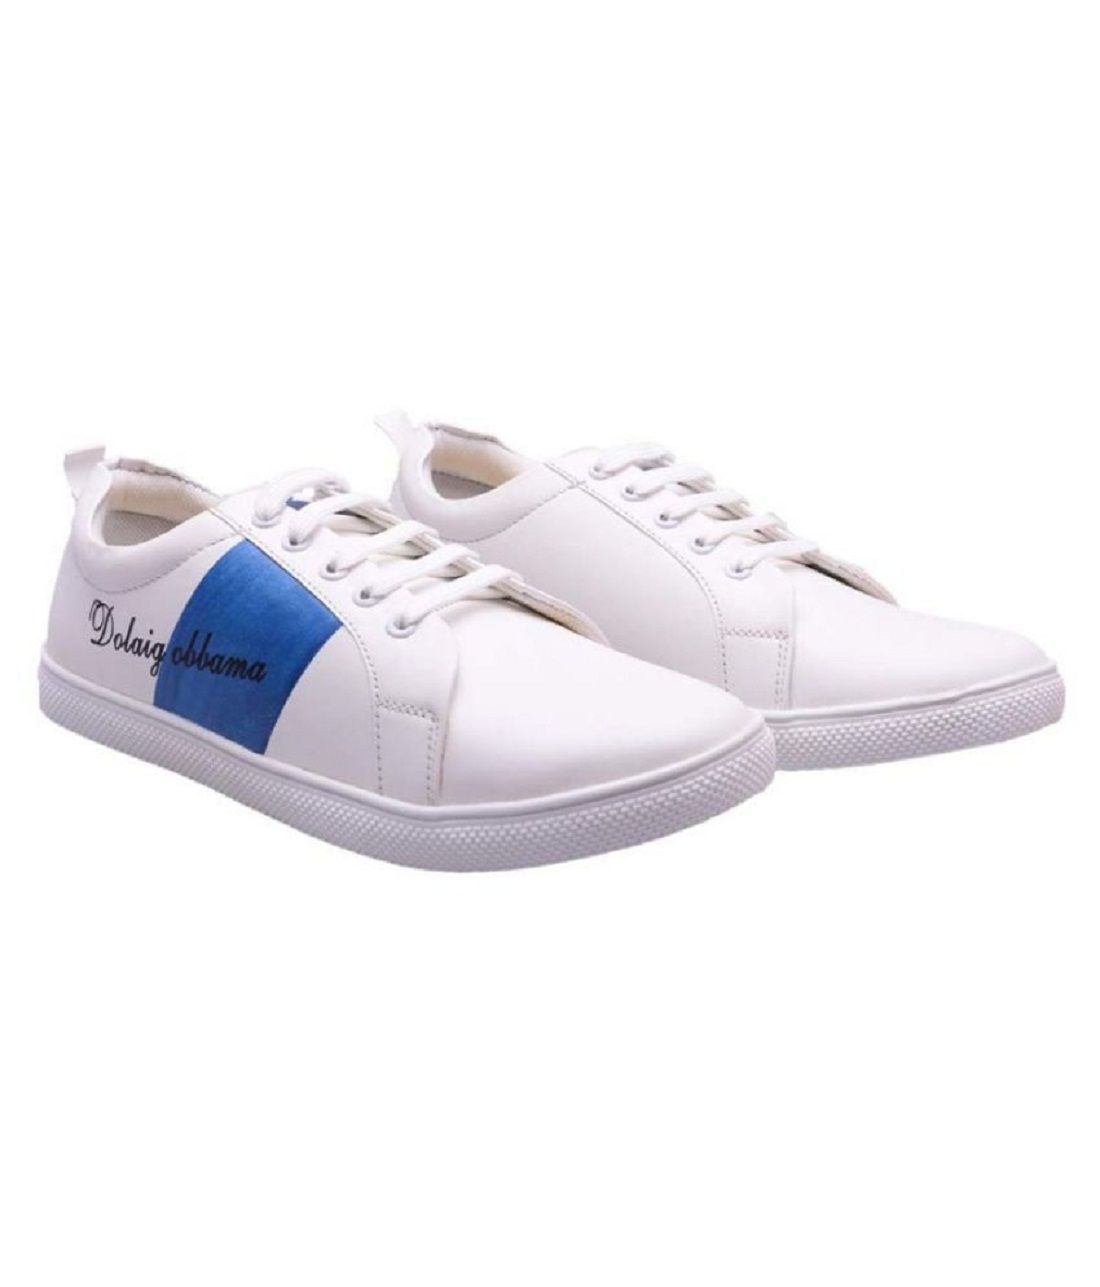 shree leather casual shoes price